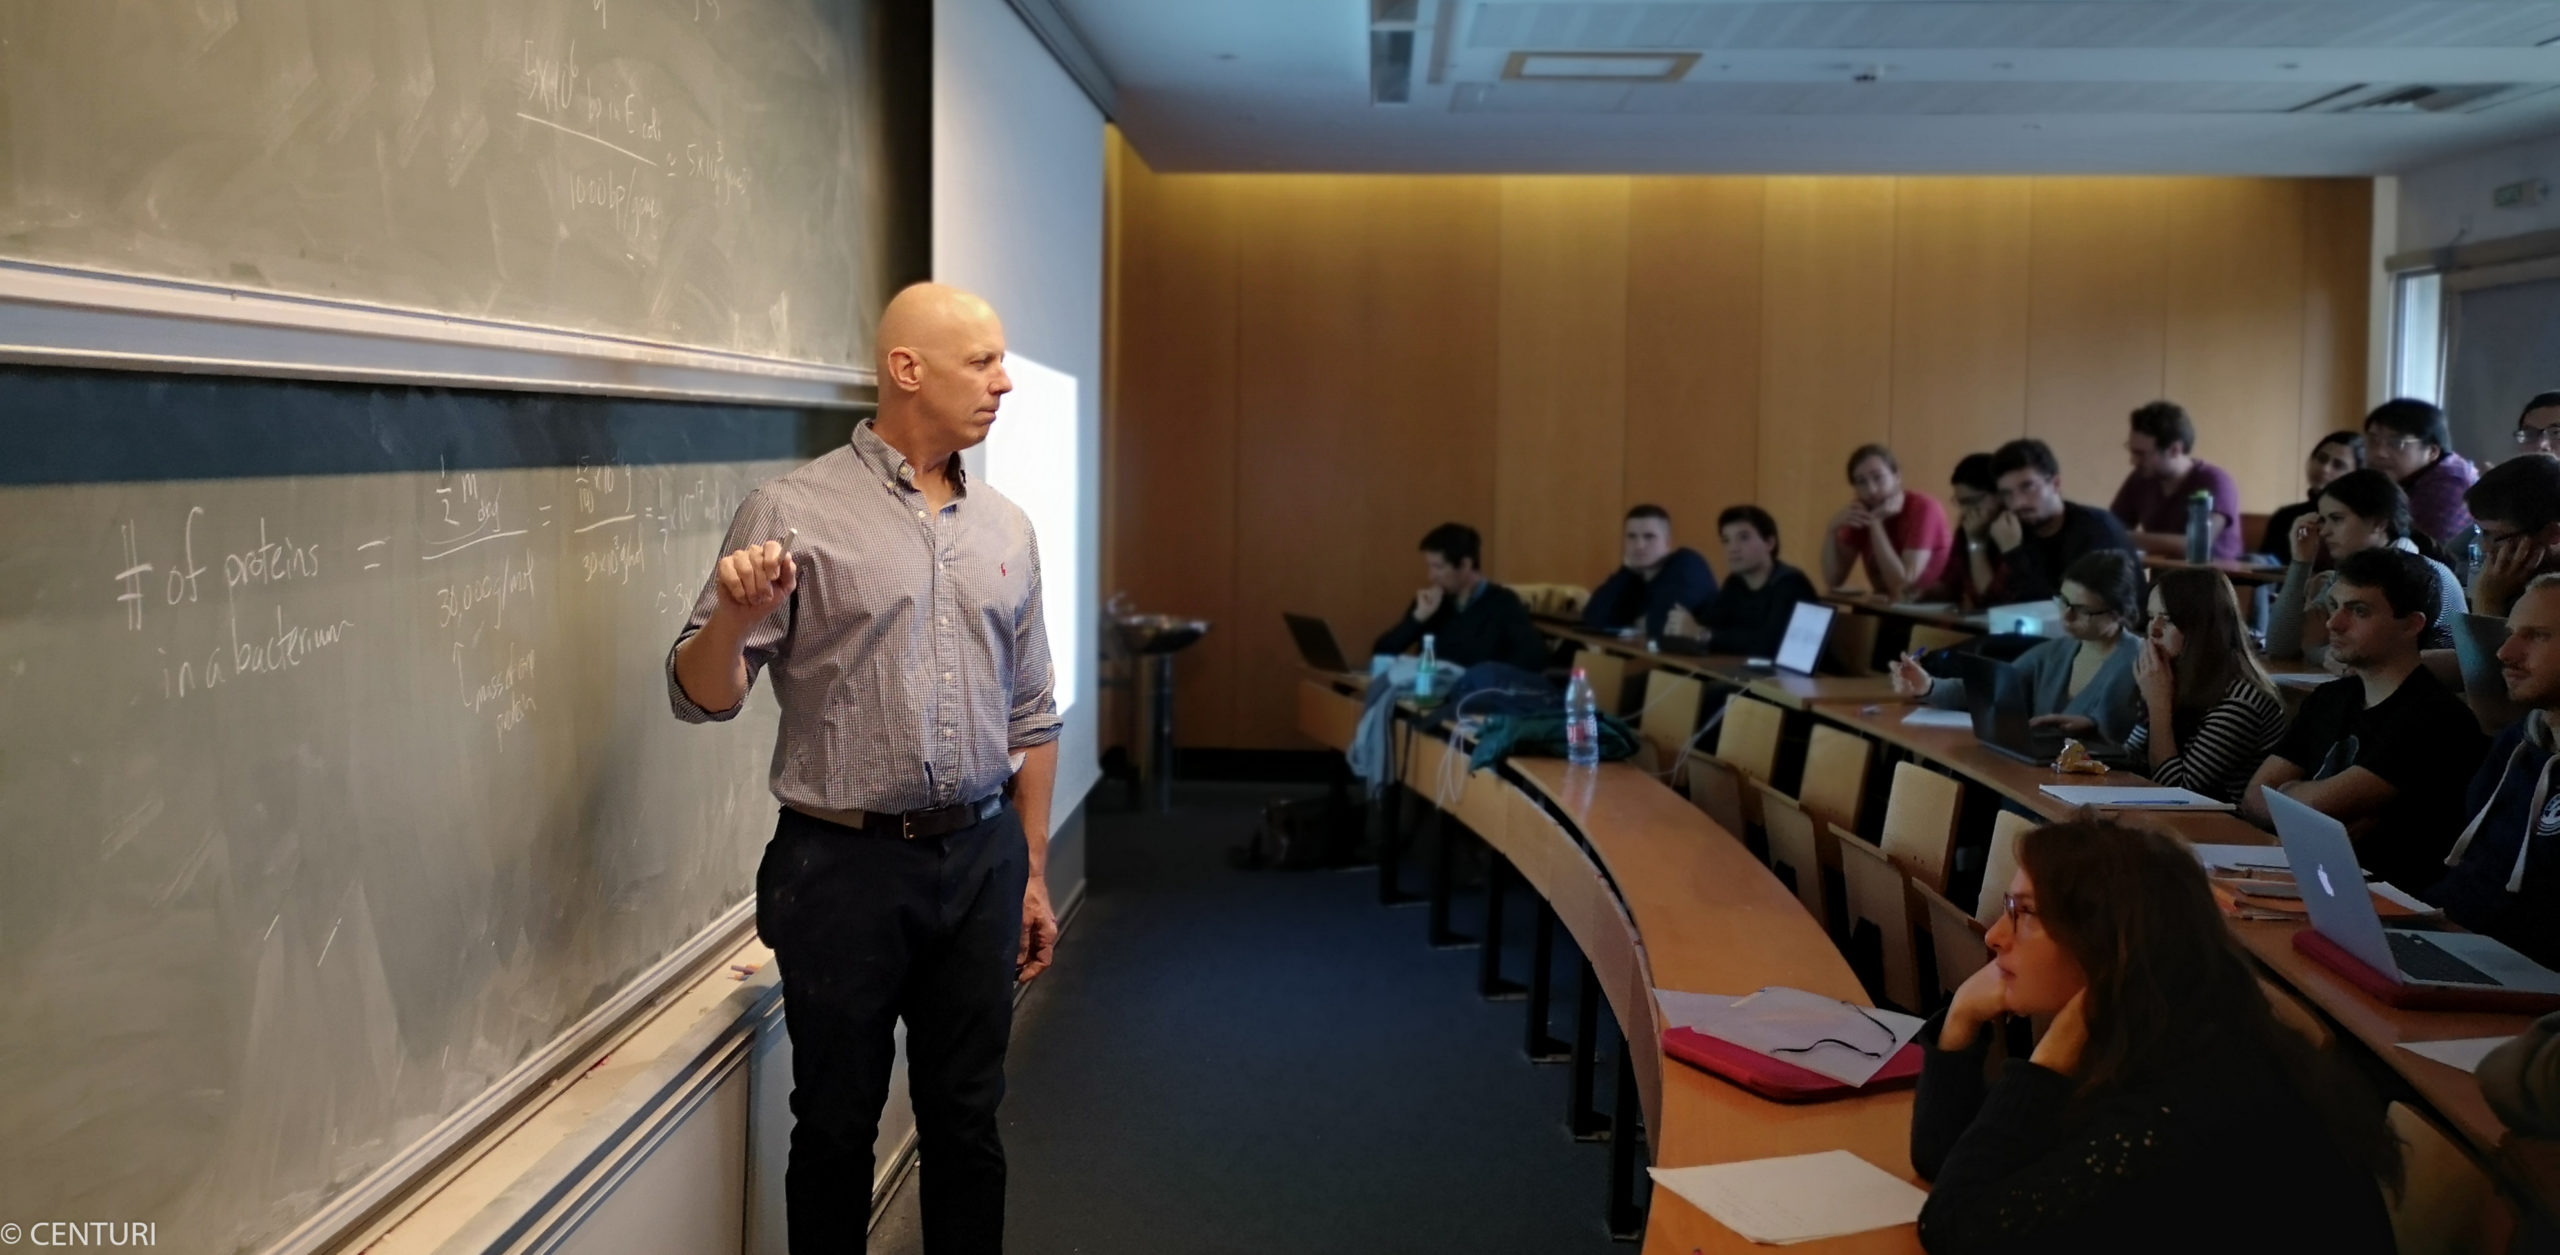 Rob Phillips (Caltech, USA) lecture during the training course "Cell biology by the numbers". (Novermber 219)